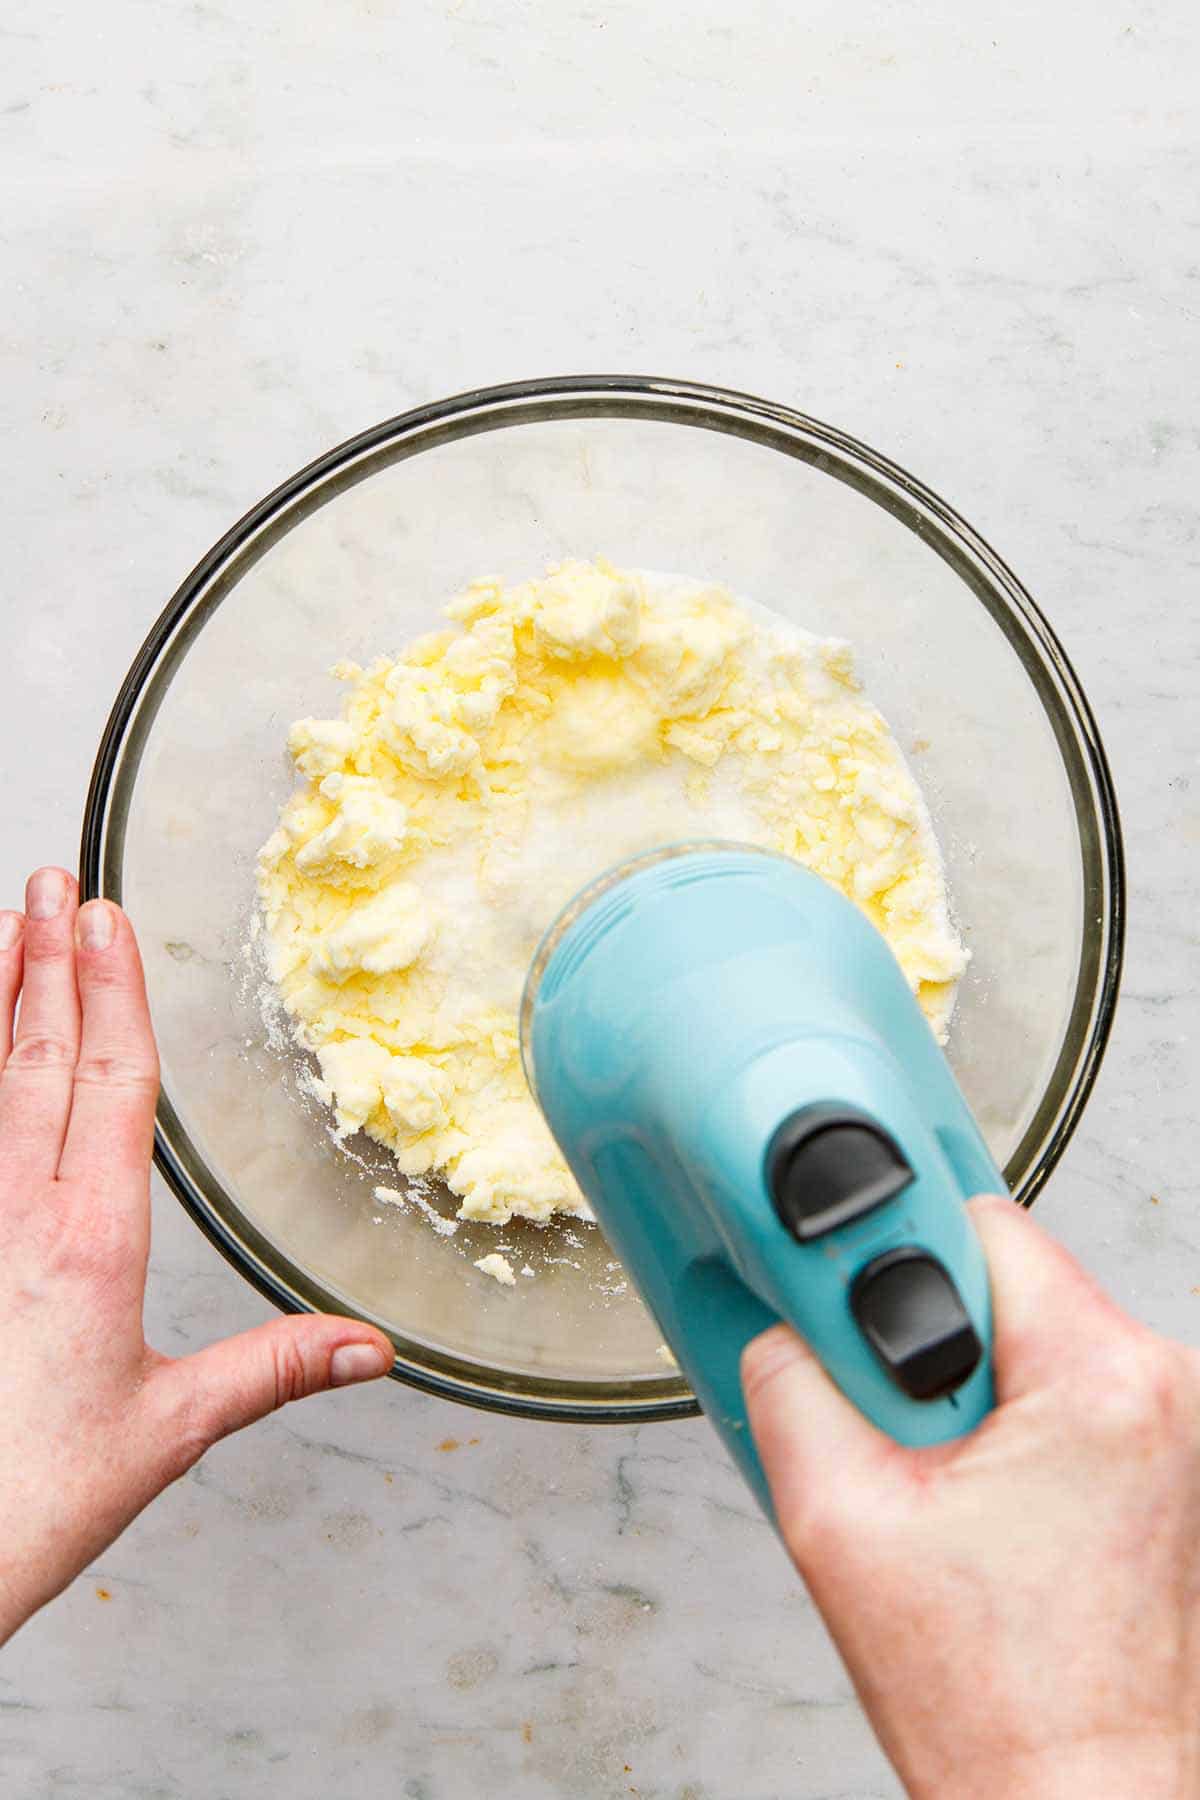 A hand using a hand mixer to beat butter and sugar in a large glass bowl.